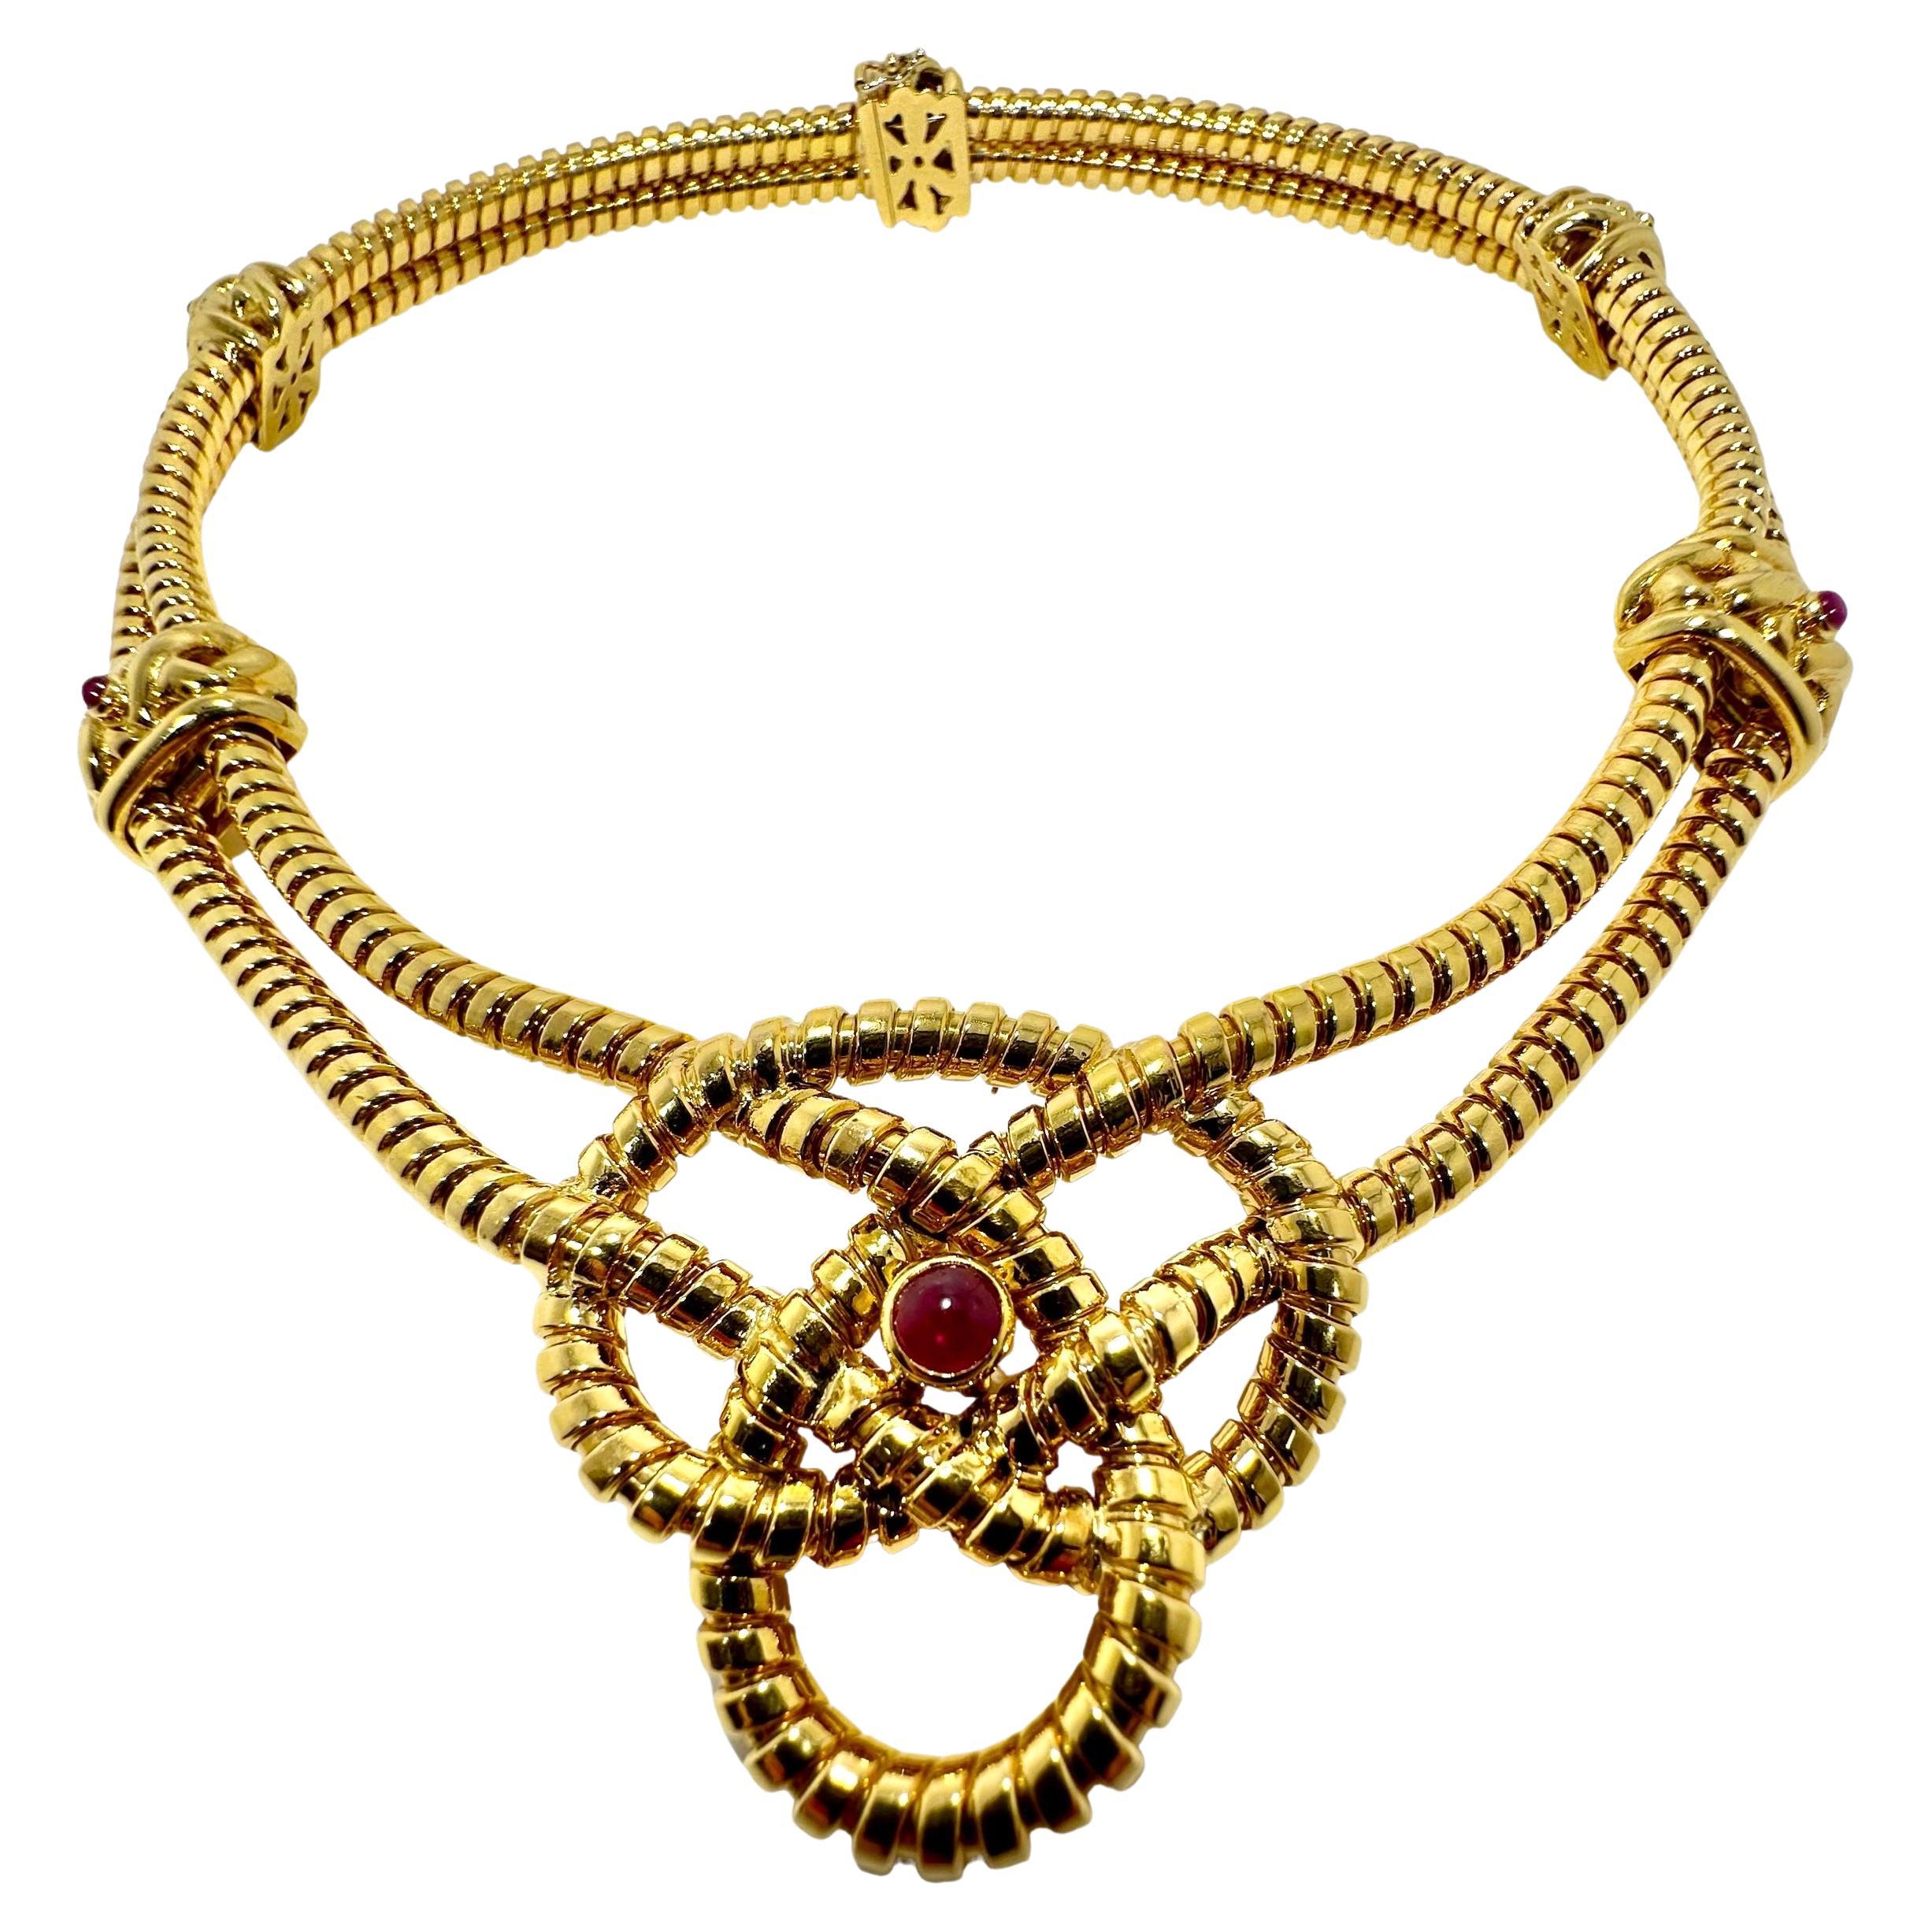 Verdura 18K Gold Double Strand Tubogas Choker Necklace with Cabochon Rubies For Sale